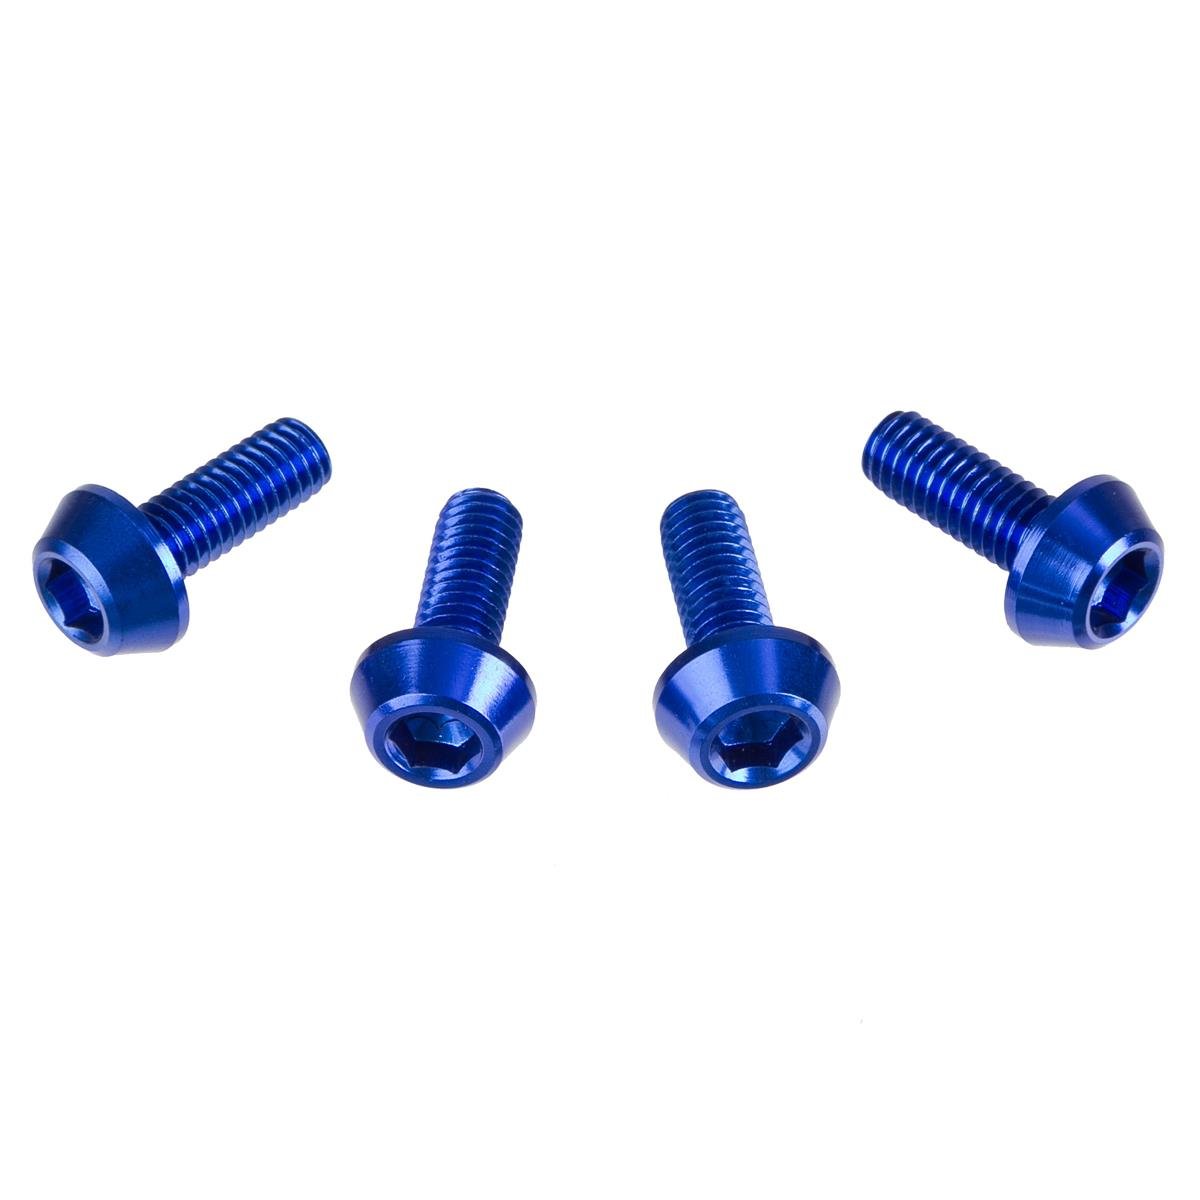 DRC Inner Hex Bolts  M6 x 16 mm, Blue, Pack of 4